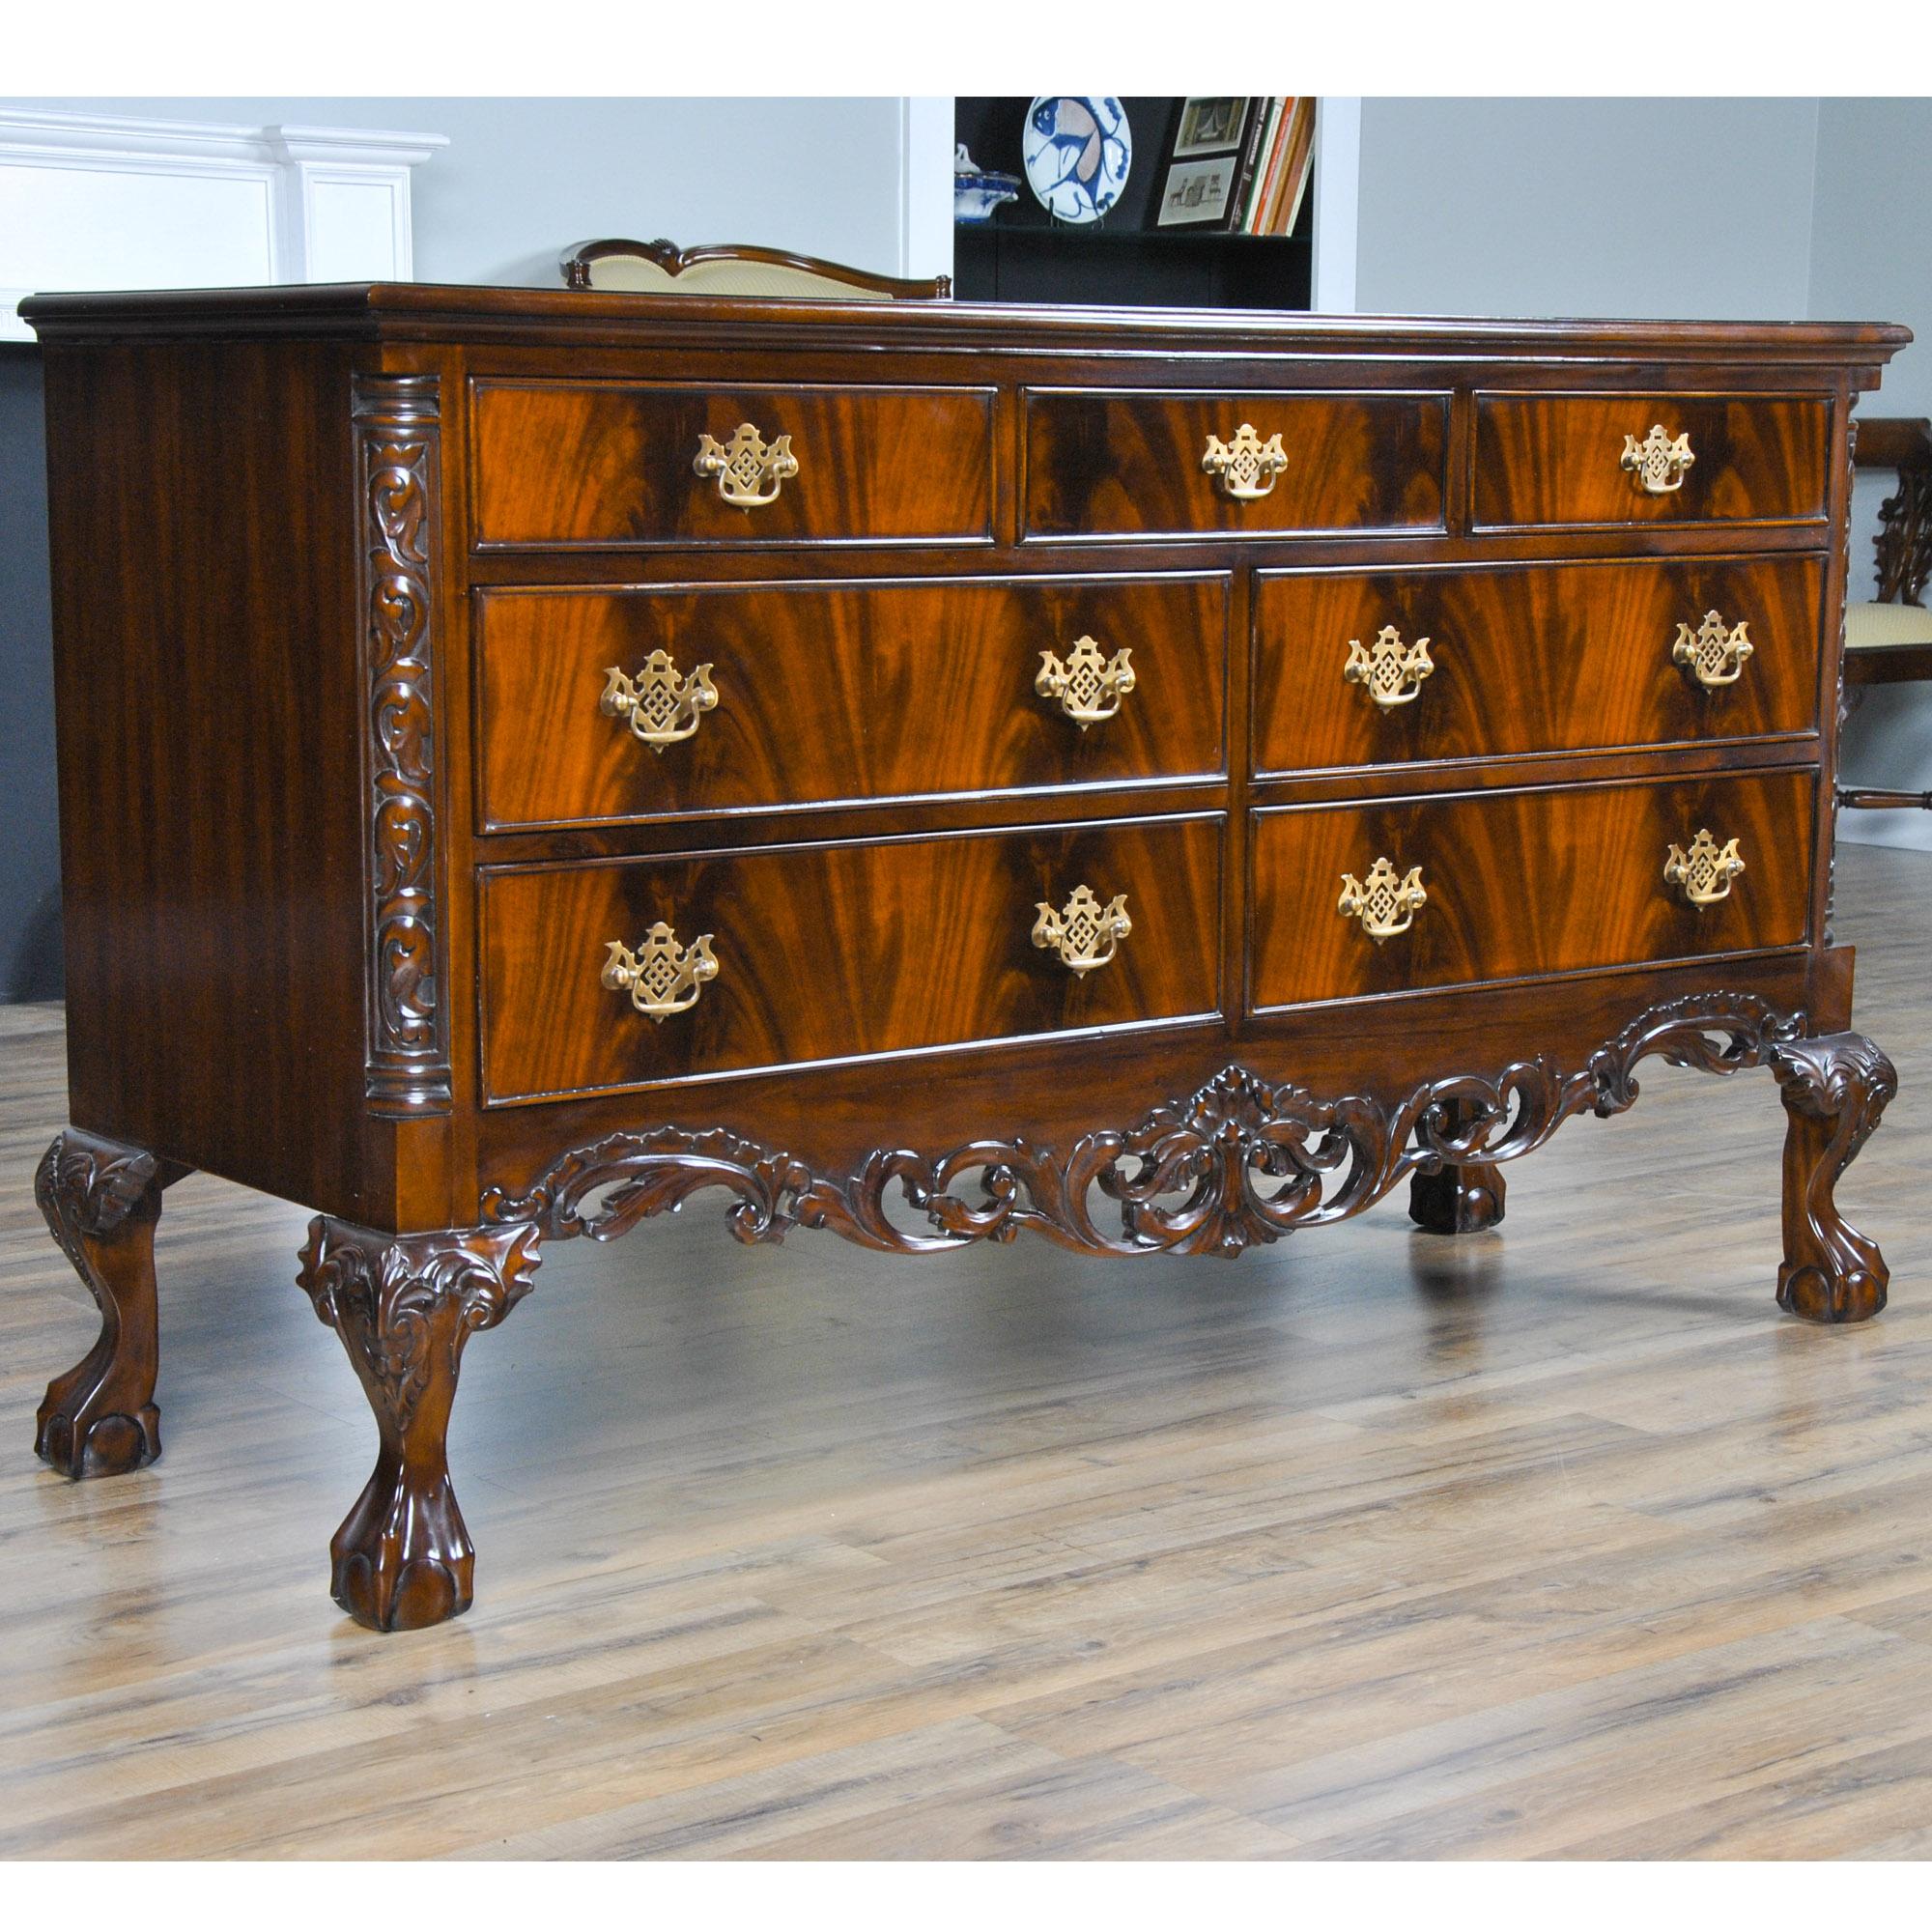 The Chippendale Mahogany Triple Dresser. A classic furniture shape this chest features three drawers across the top section and two rows of two drawers below to give this large dresser an elegant and traditional furniture appearance that is both